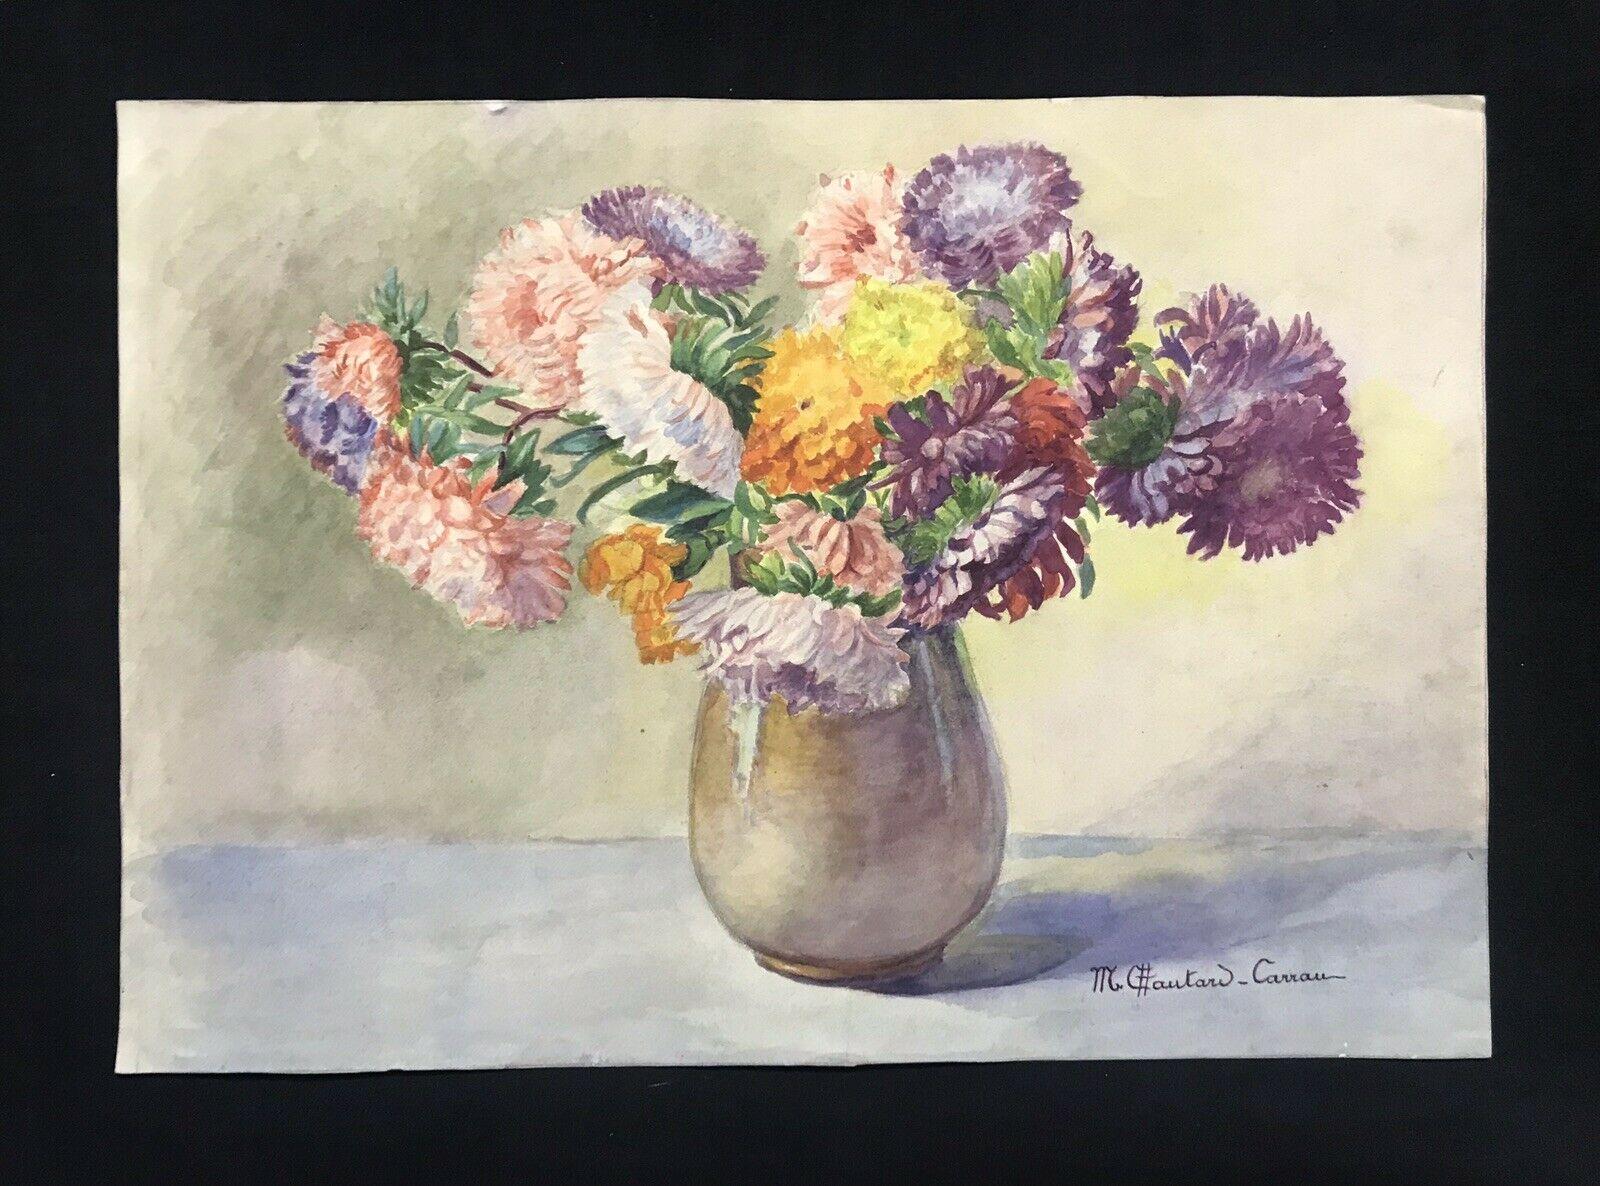 MARIE CHAUTARD-CARREAU - FINE EARLY 20thC FRENCH IMPRESSIONIST- FLOWERS IN VASE - Painting by Marie-Amelie Chautard-Carreau